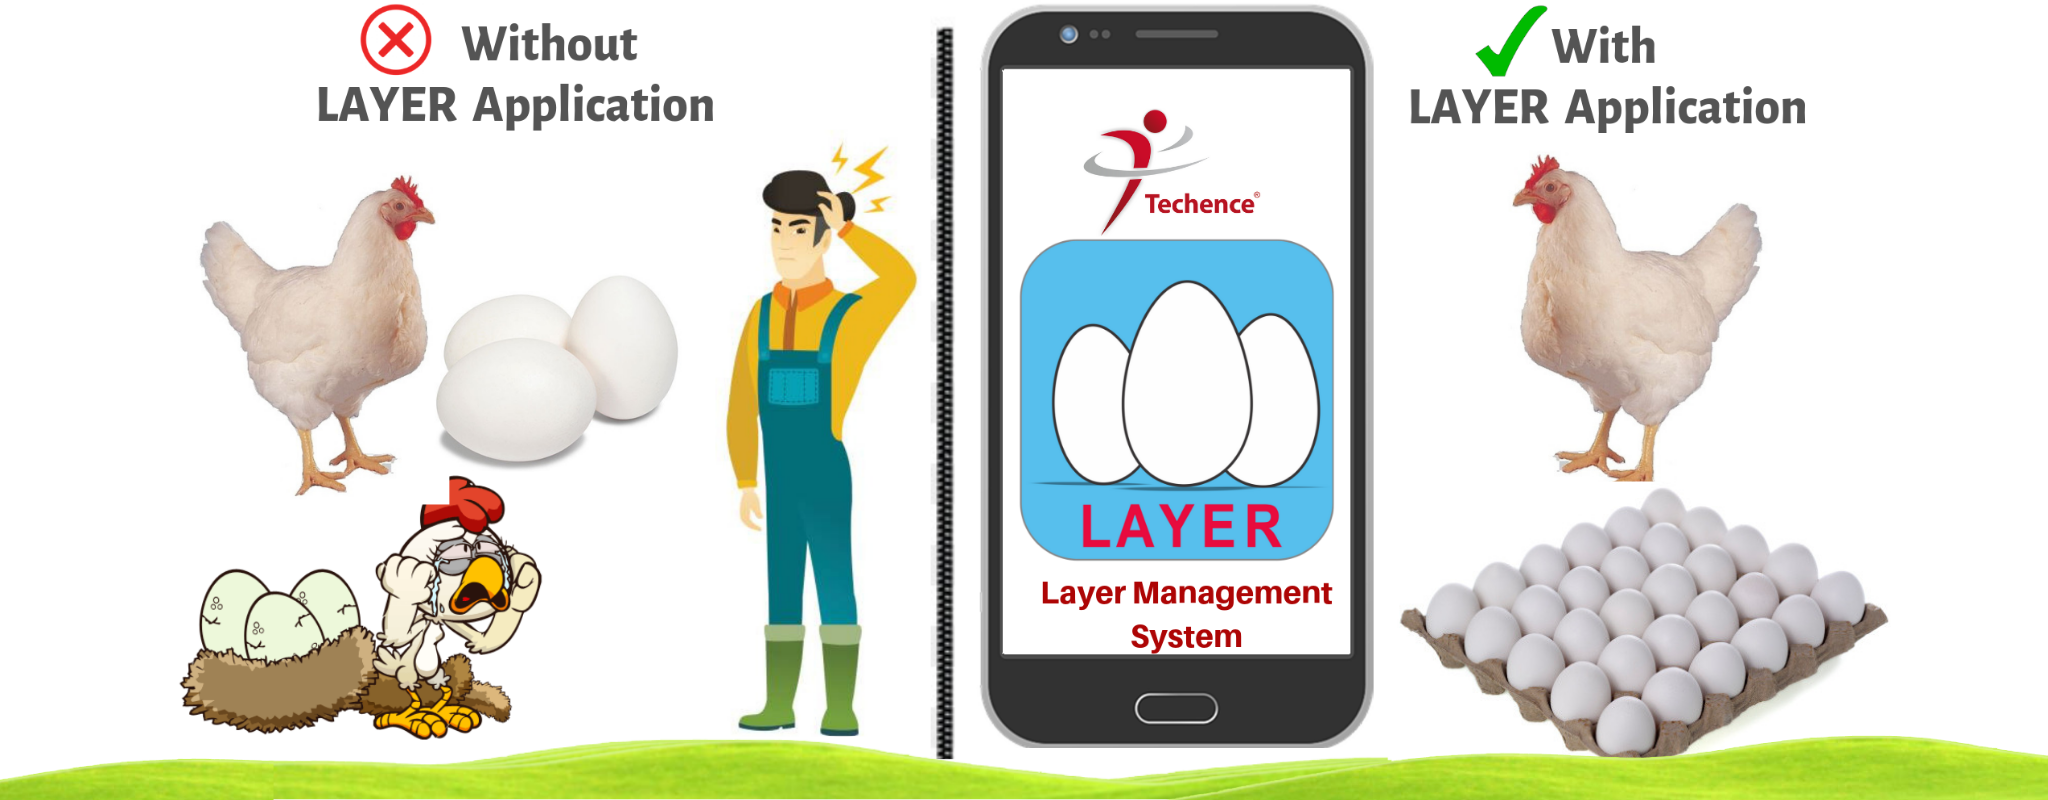 LMS Layer Management System 